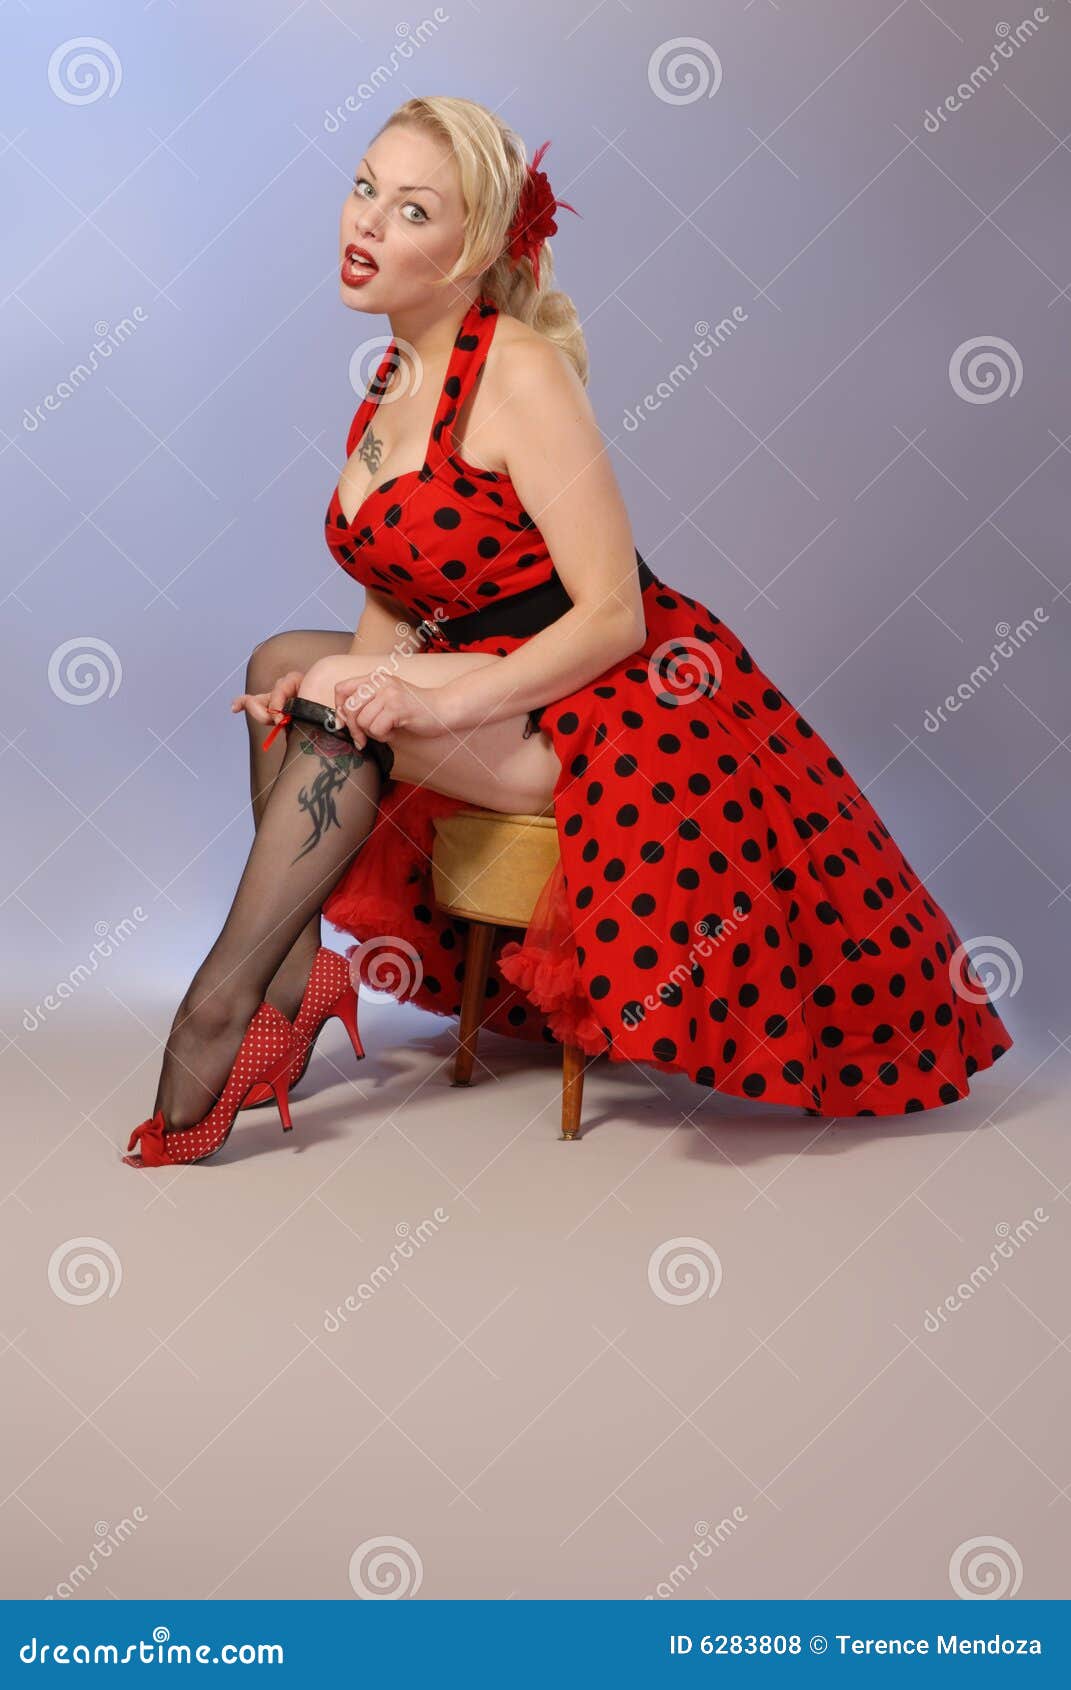 gorgeous blonde fifties style pinup